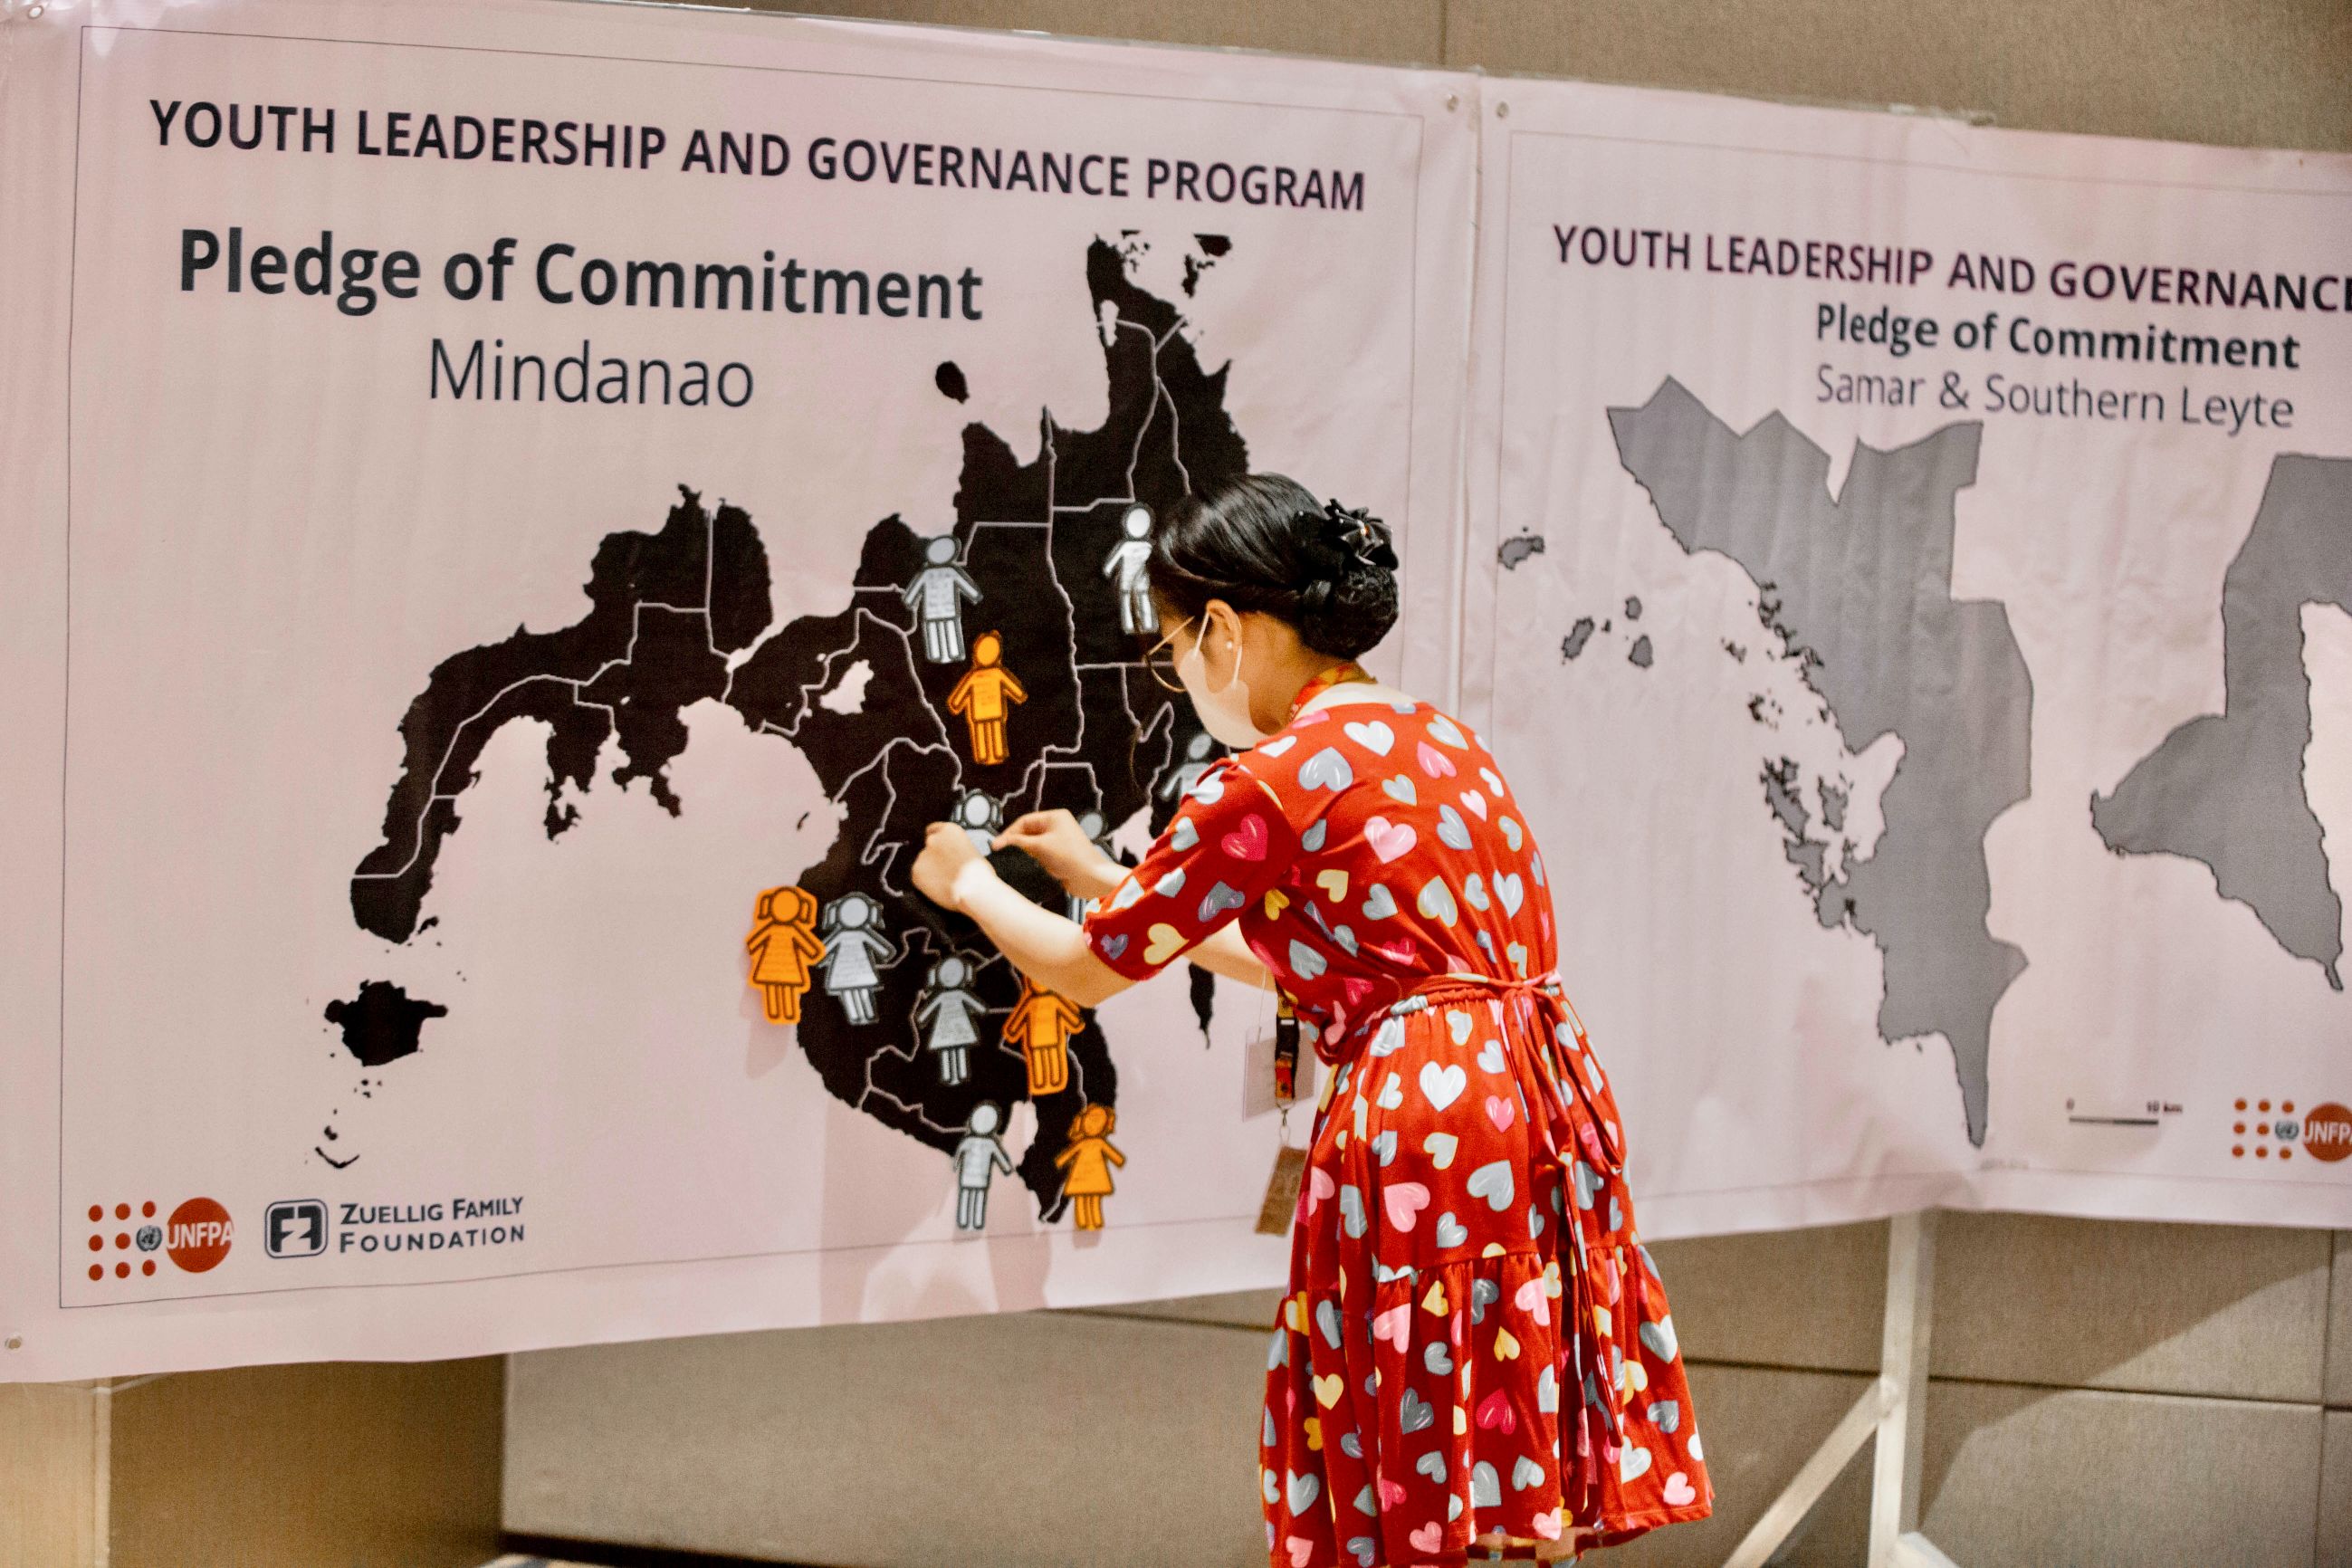 A women sticking a cutout of a girl on a map of Mindanao as part of the event's pledge of commitment.